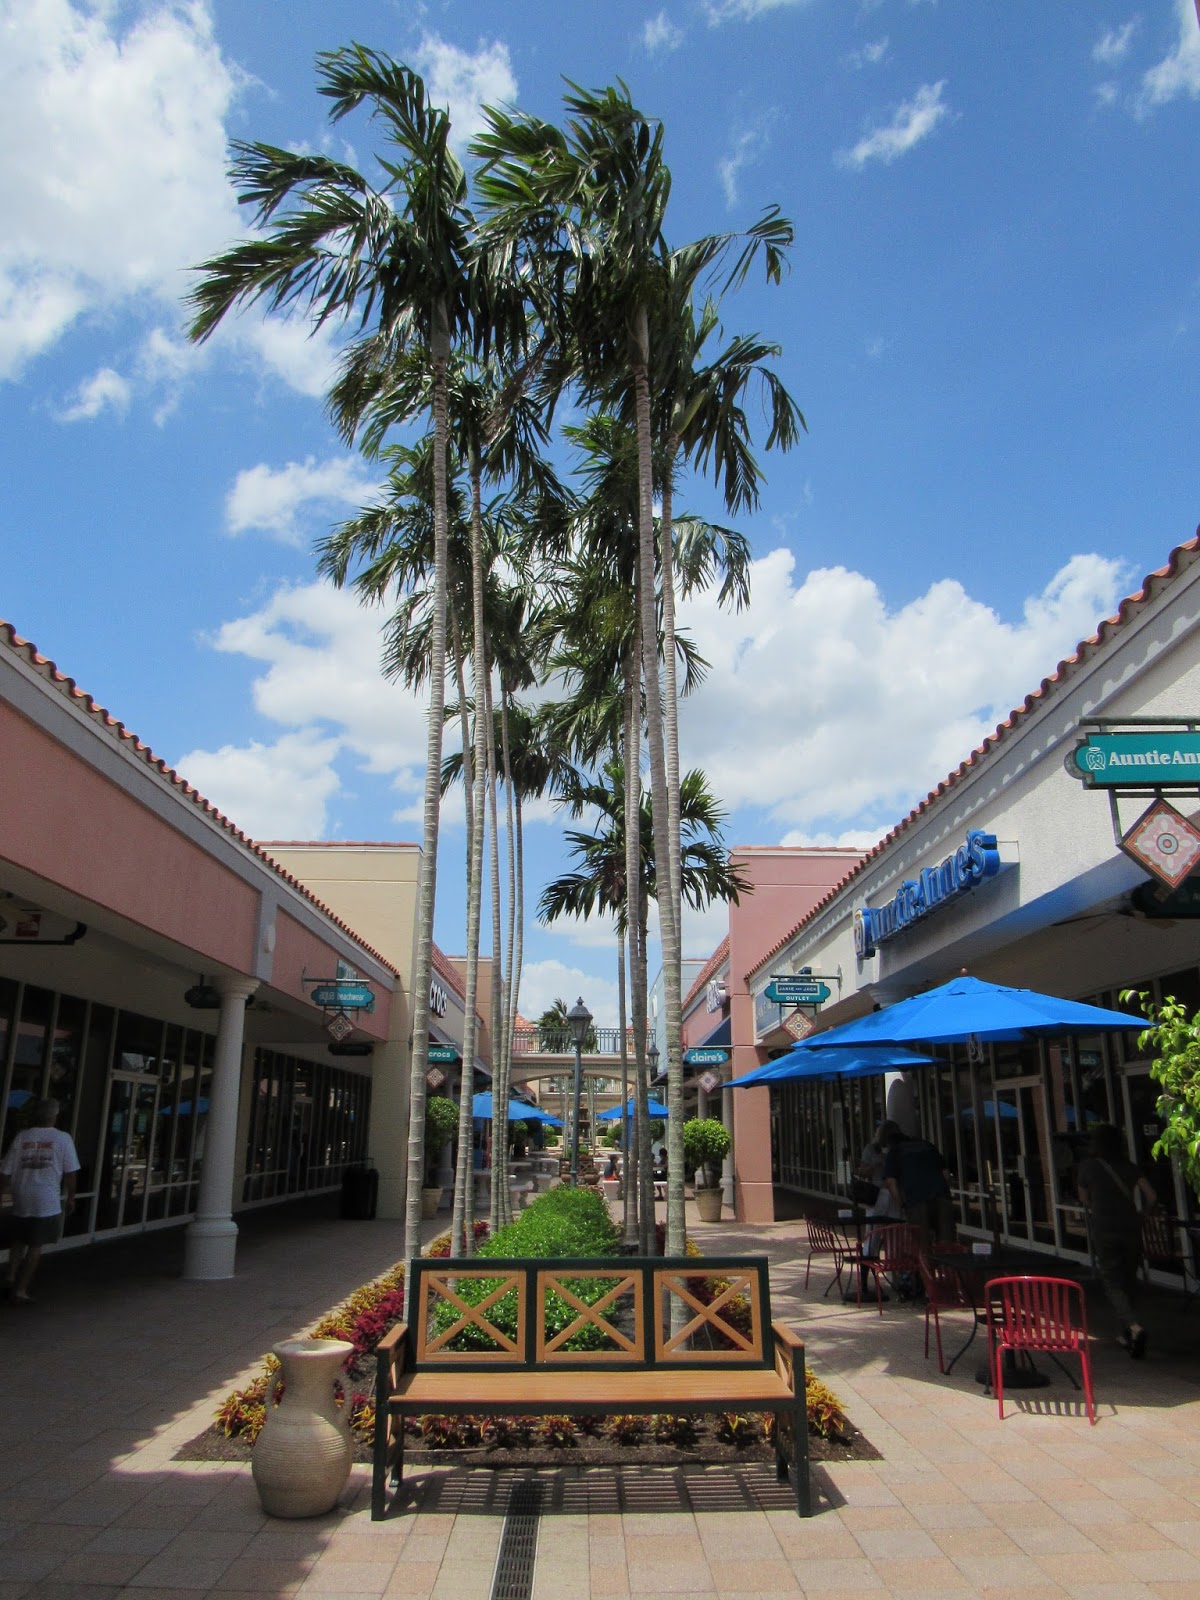 Successful Shopping Trip to Miromar Outlets in Estero, Florida!